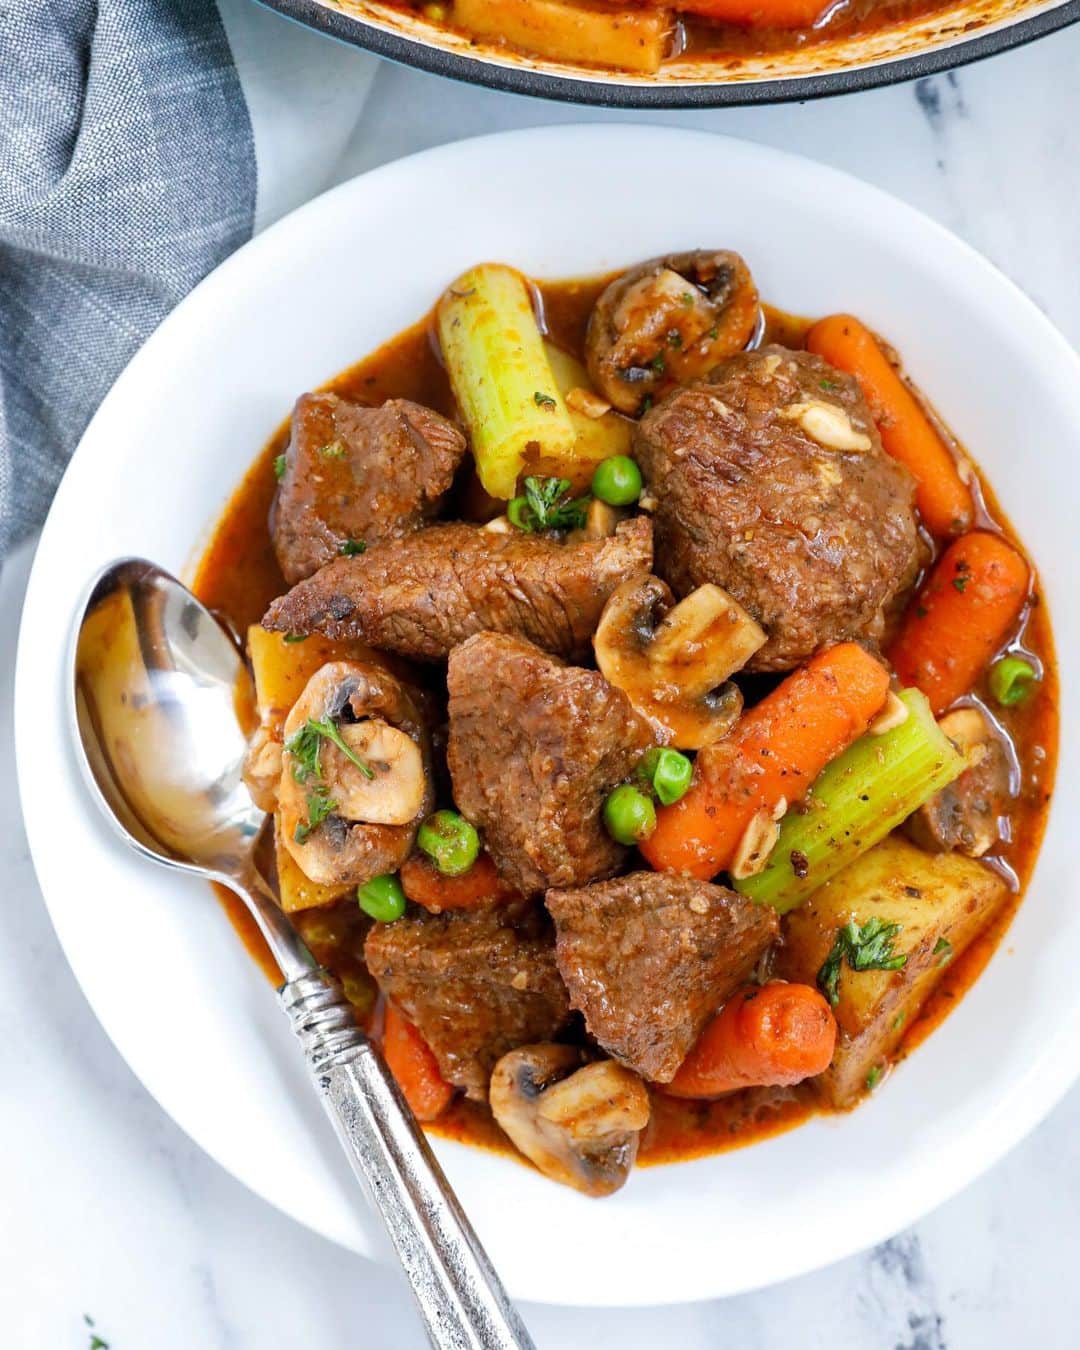 Easy Recipesのインスタグラム：「Look no further for the Best Beef Stew! This is my take on the classic beef stew, it's hearty, flavorful and perfectly warming for those cold winter months. Tender beef chunks, packed in with veggies in a rich broth - delicious!  Full recipe link in my bio.  https://www.cookinwithmima.com/the-best-beef-stew/」